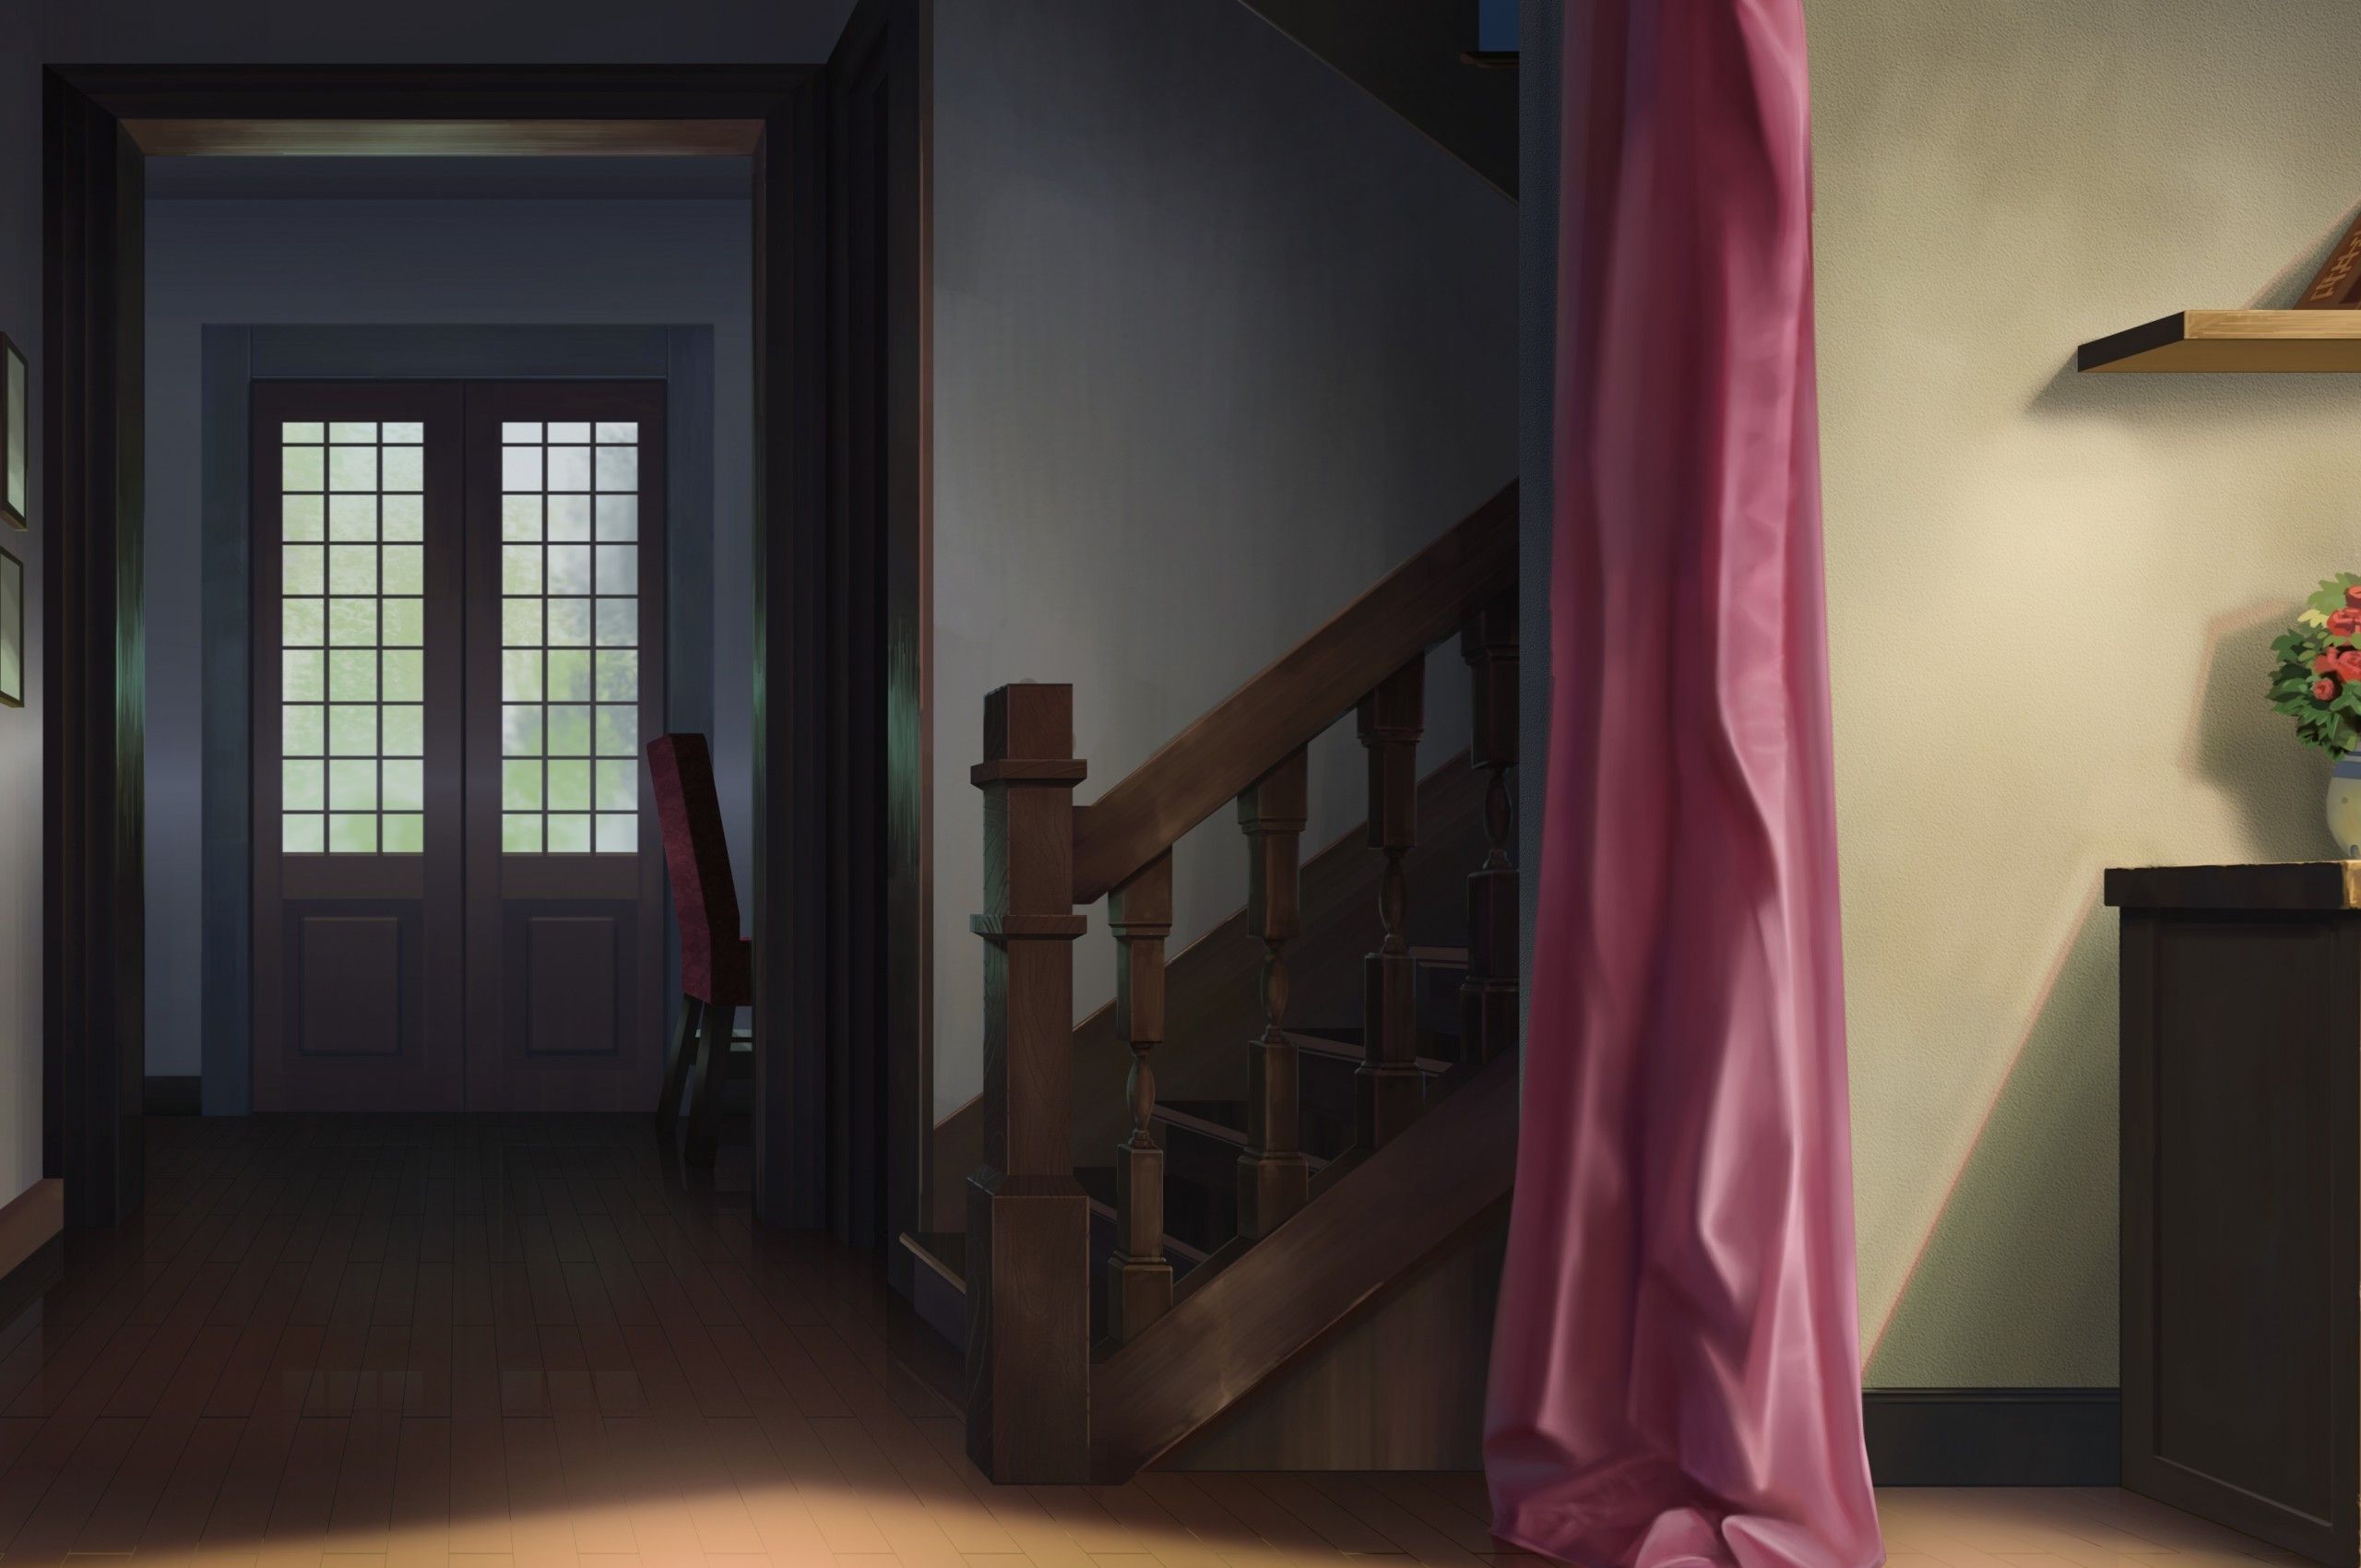 Download 2560x1700 Anime House, Interior, Stairs Wallpaper